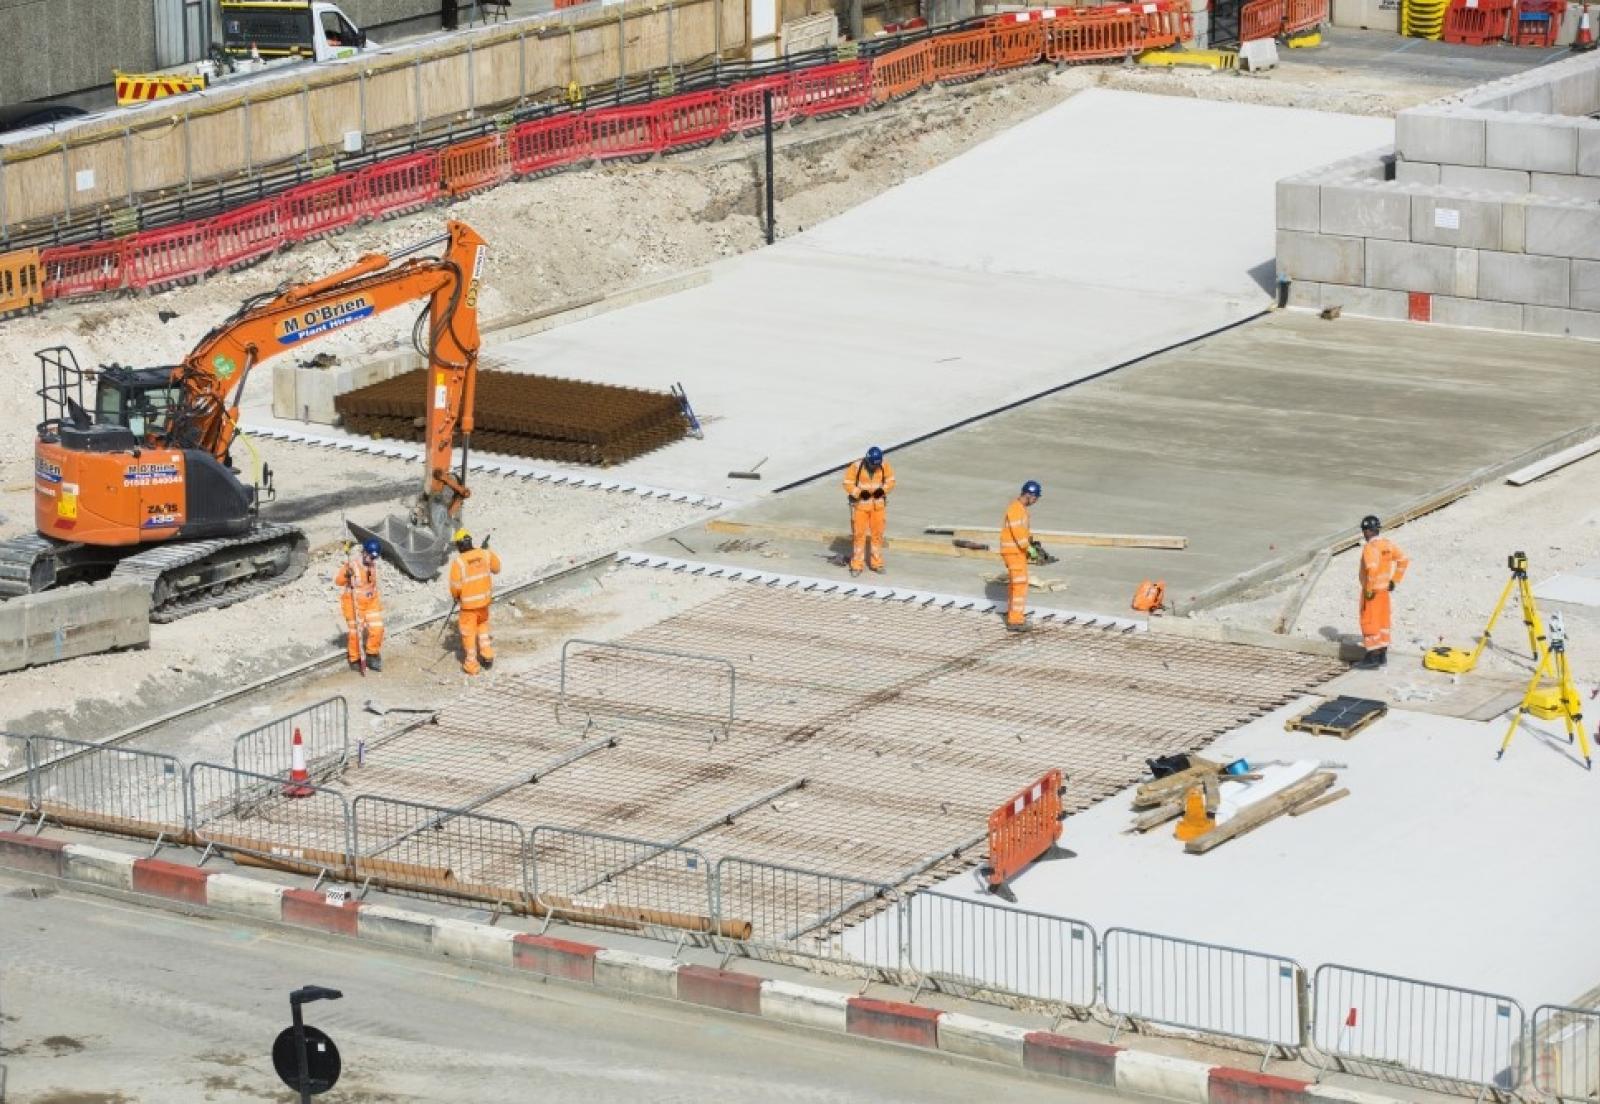 HS2: Low carbon concrete to be used to reduce carbon emissions | Rail News